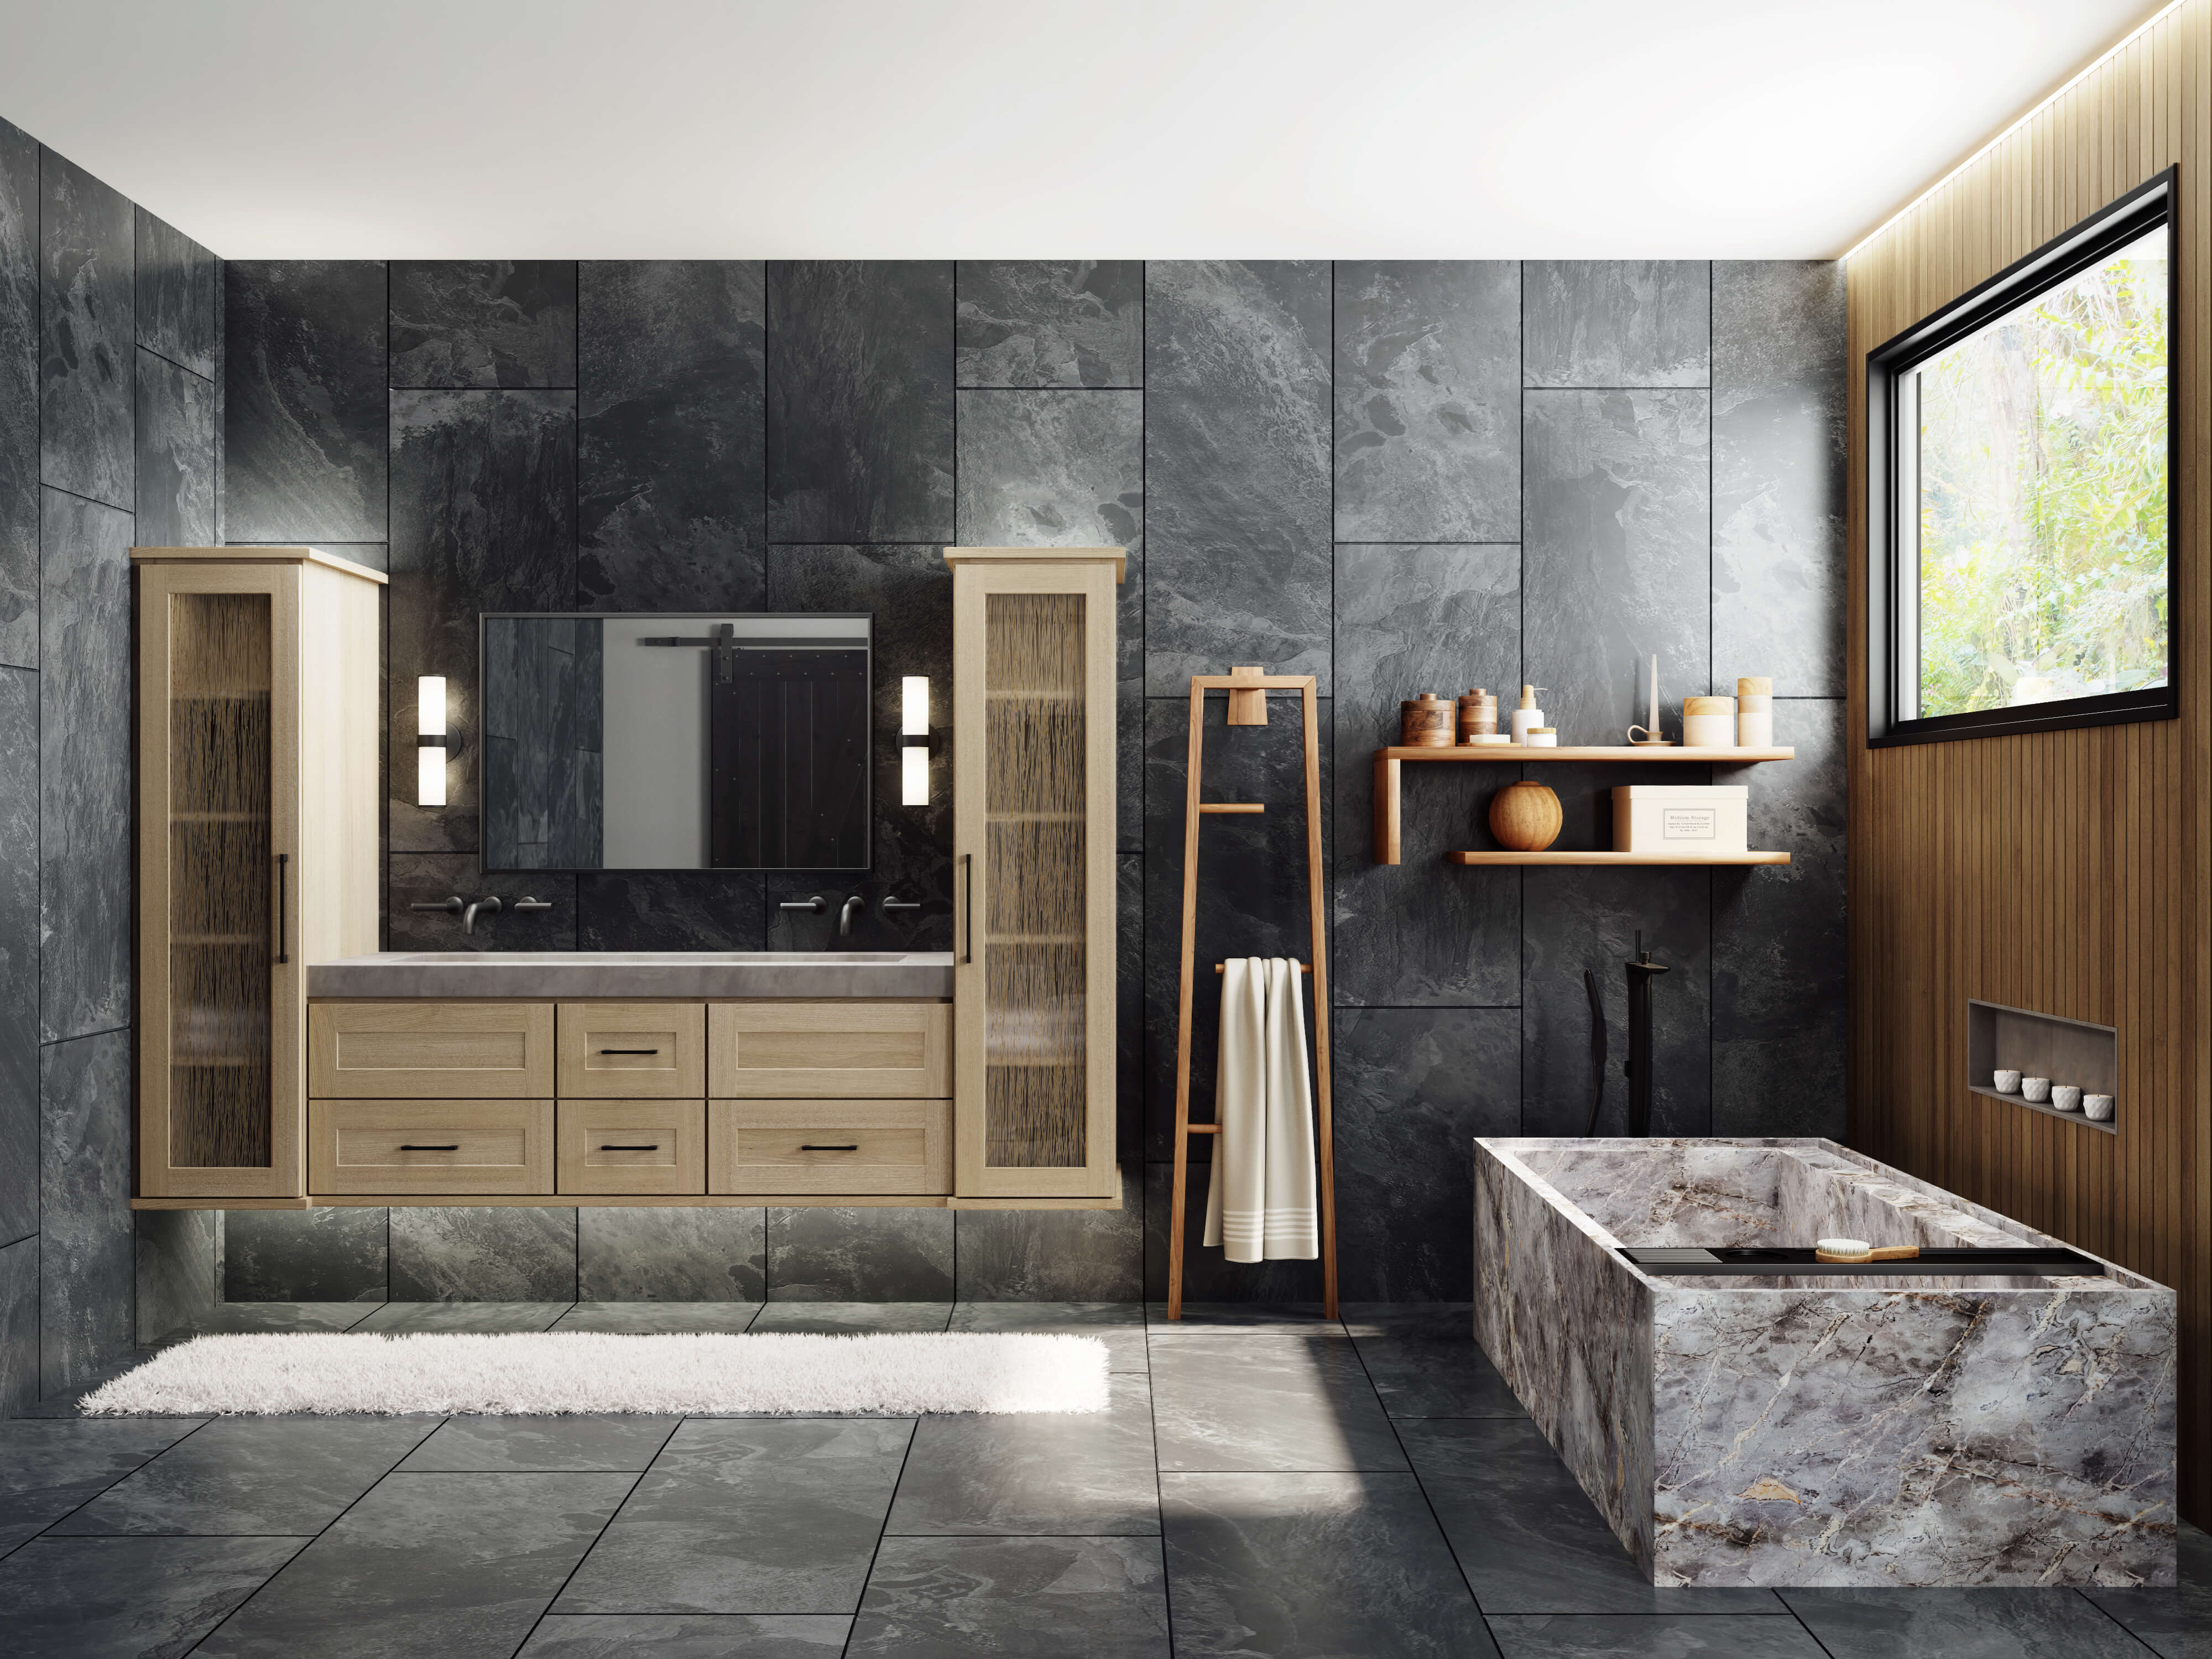 This monastic and intimate bathroom unites cool and warm natural tones with a shallow shaker cabinet door style in a light stained White Oak. Dark floor-to-ceiling tiles create a moody look.